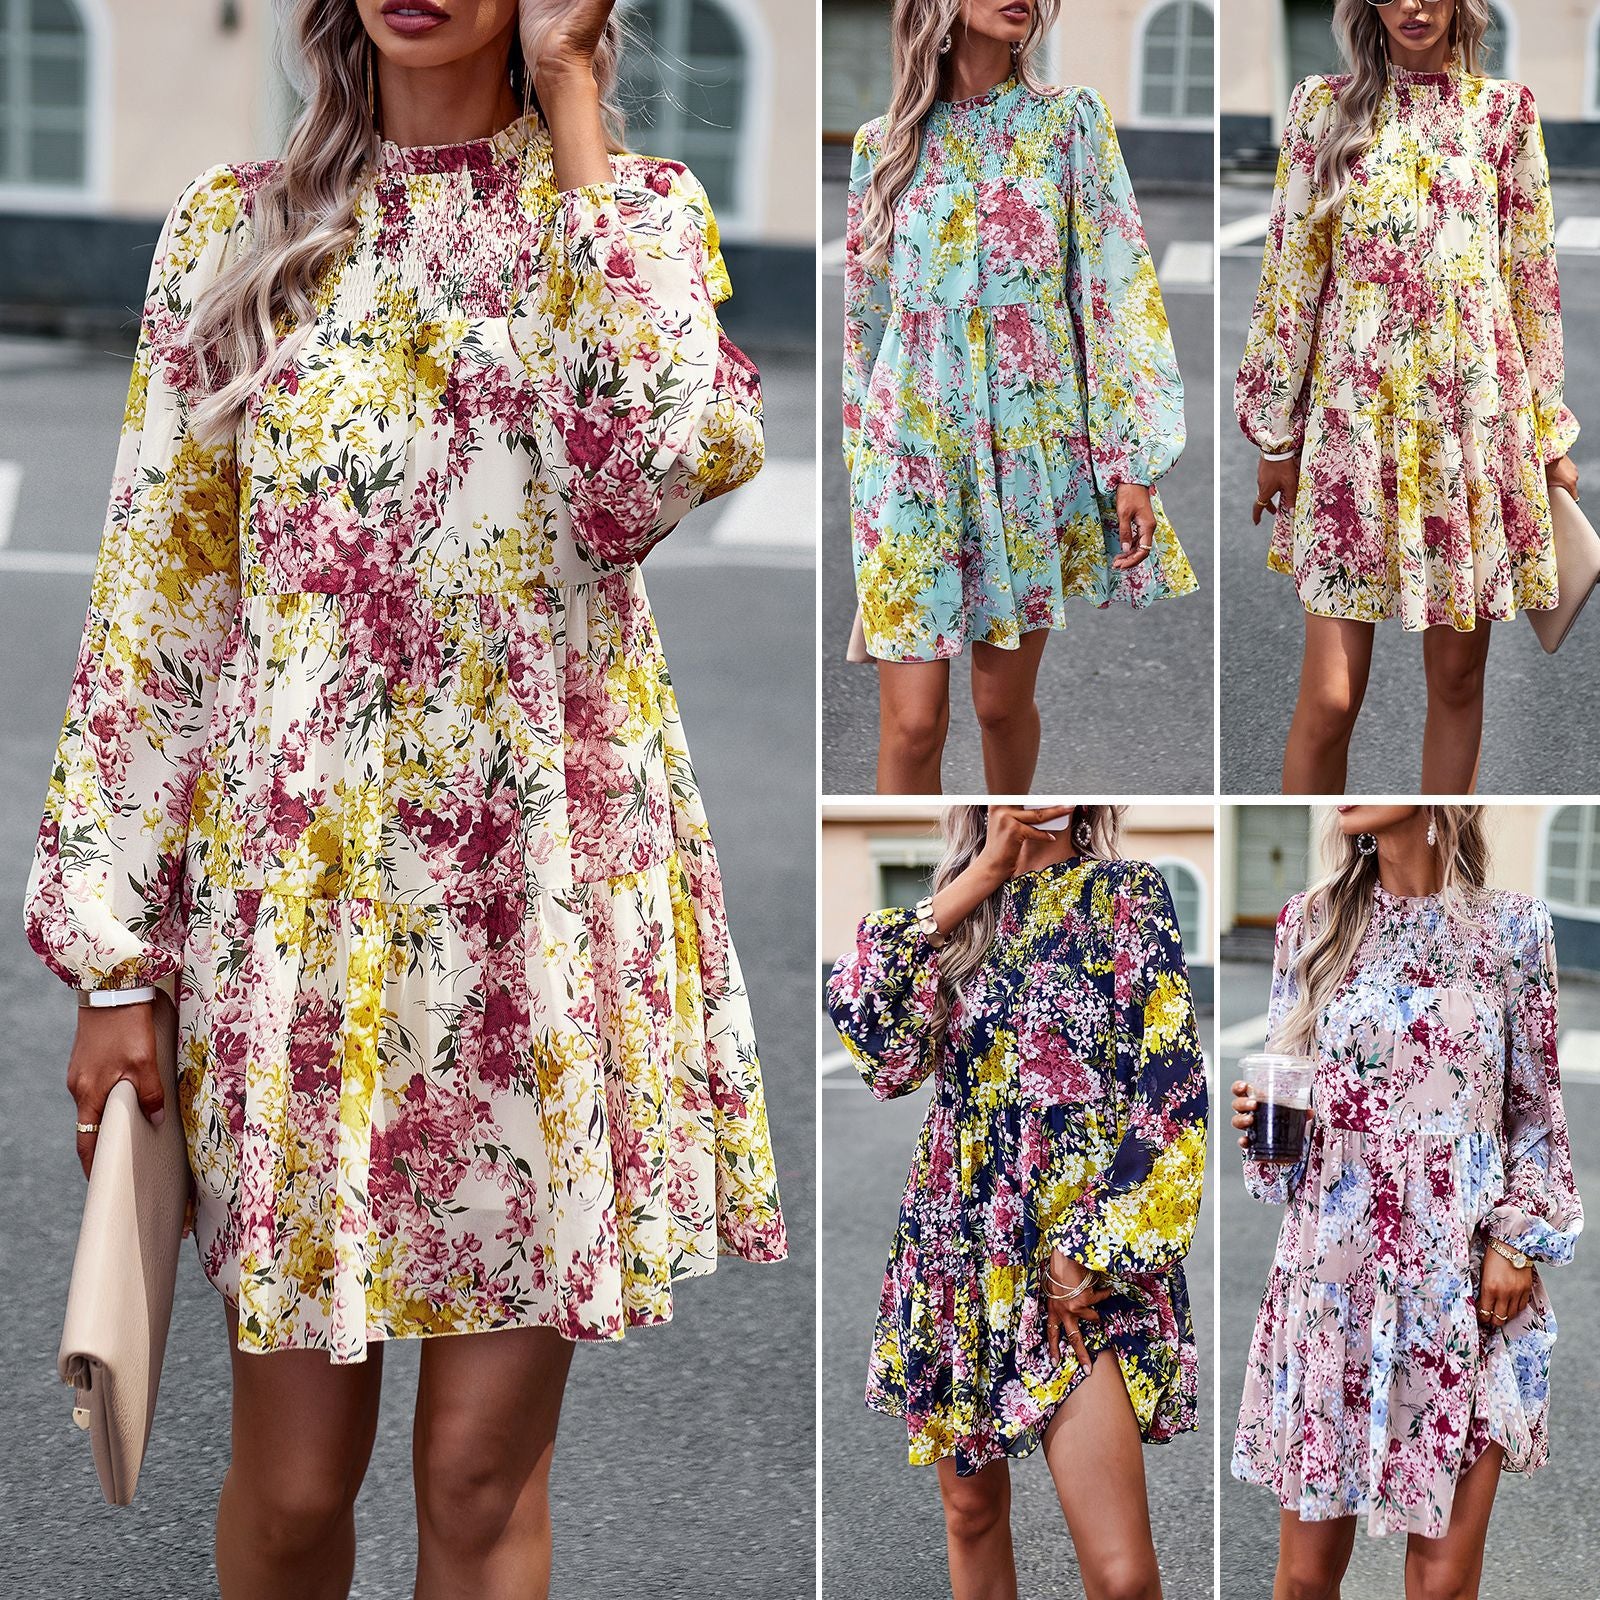 Women's Graceful And Fashionable Printed Long-sleeved Dress